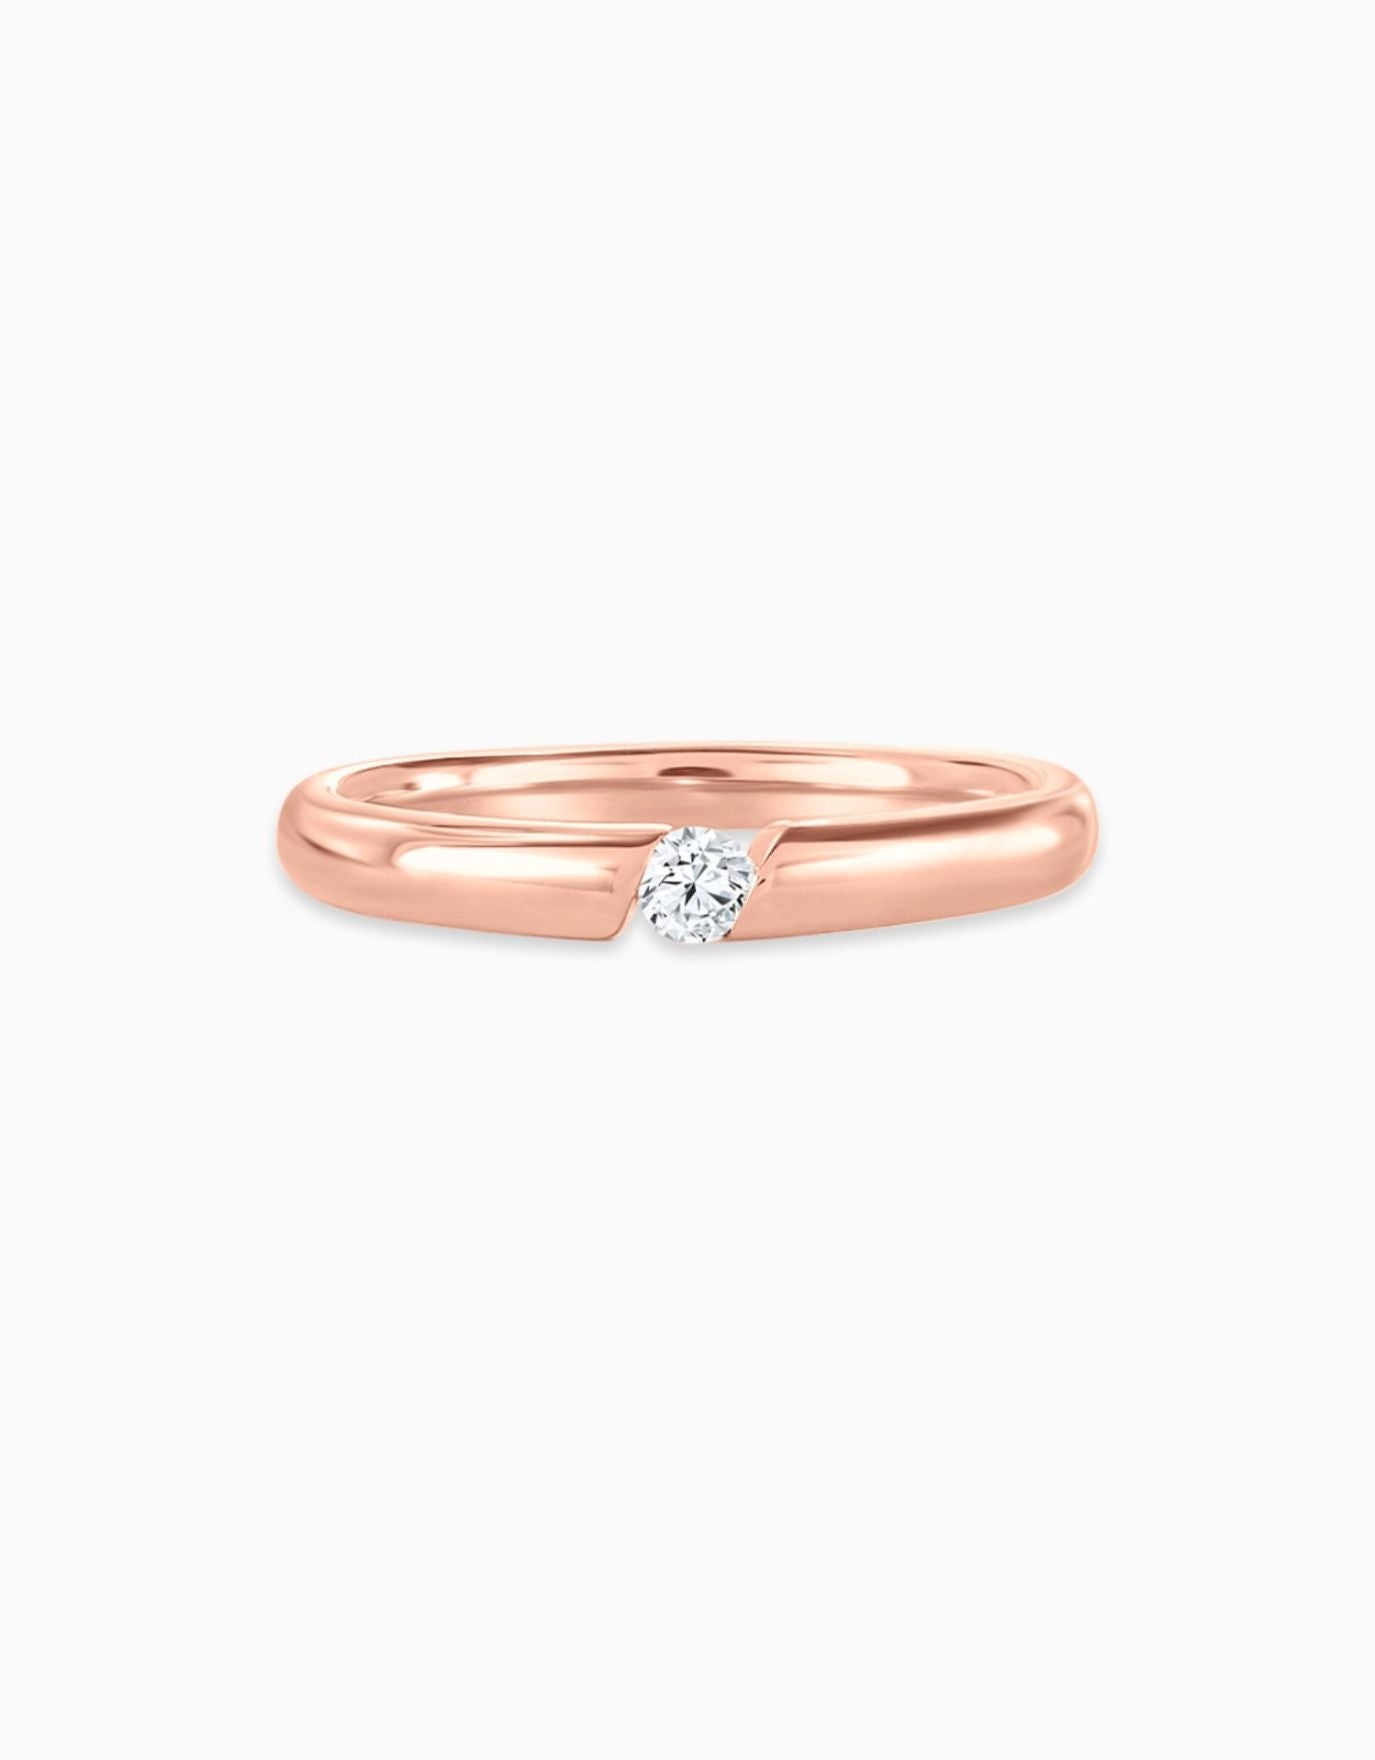 LVC Classique Diamond Tension Wedding Band in Rose Gold